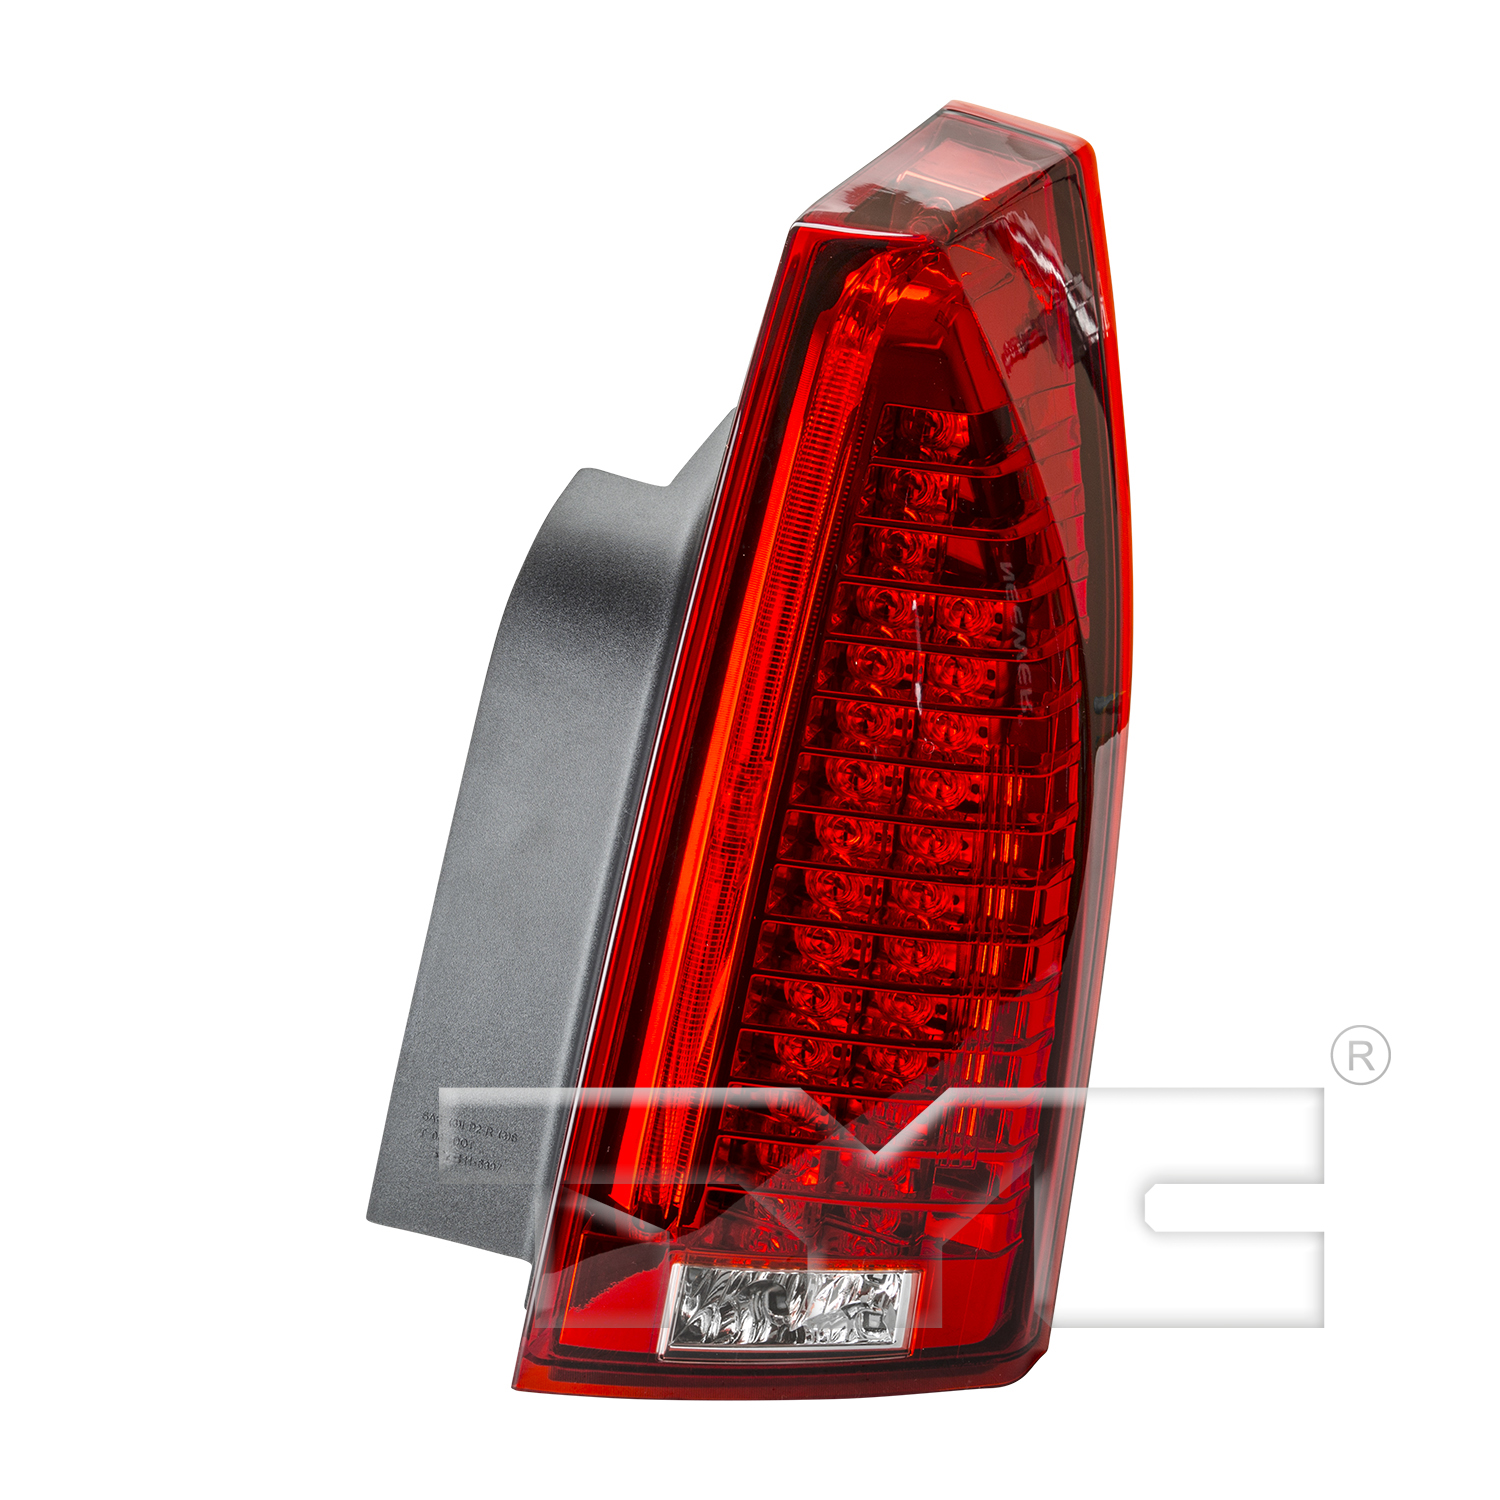 Aftermarket TAILLIGHTS for CADILLAC - CTS, CTS,08-13,RT Taillamp assy